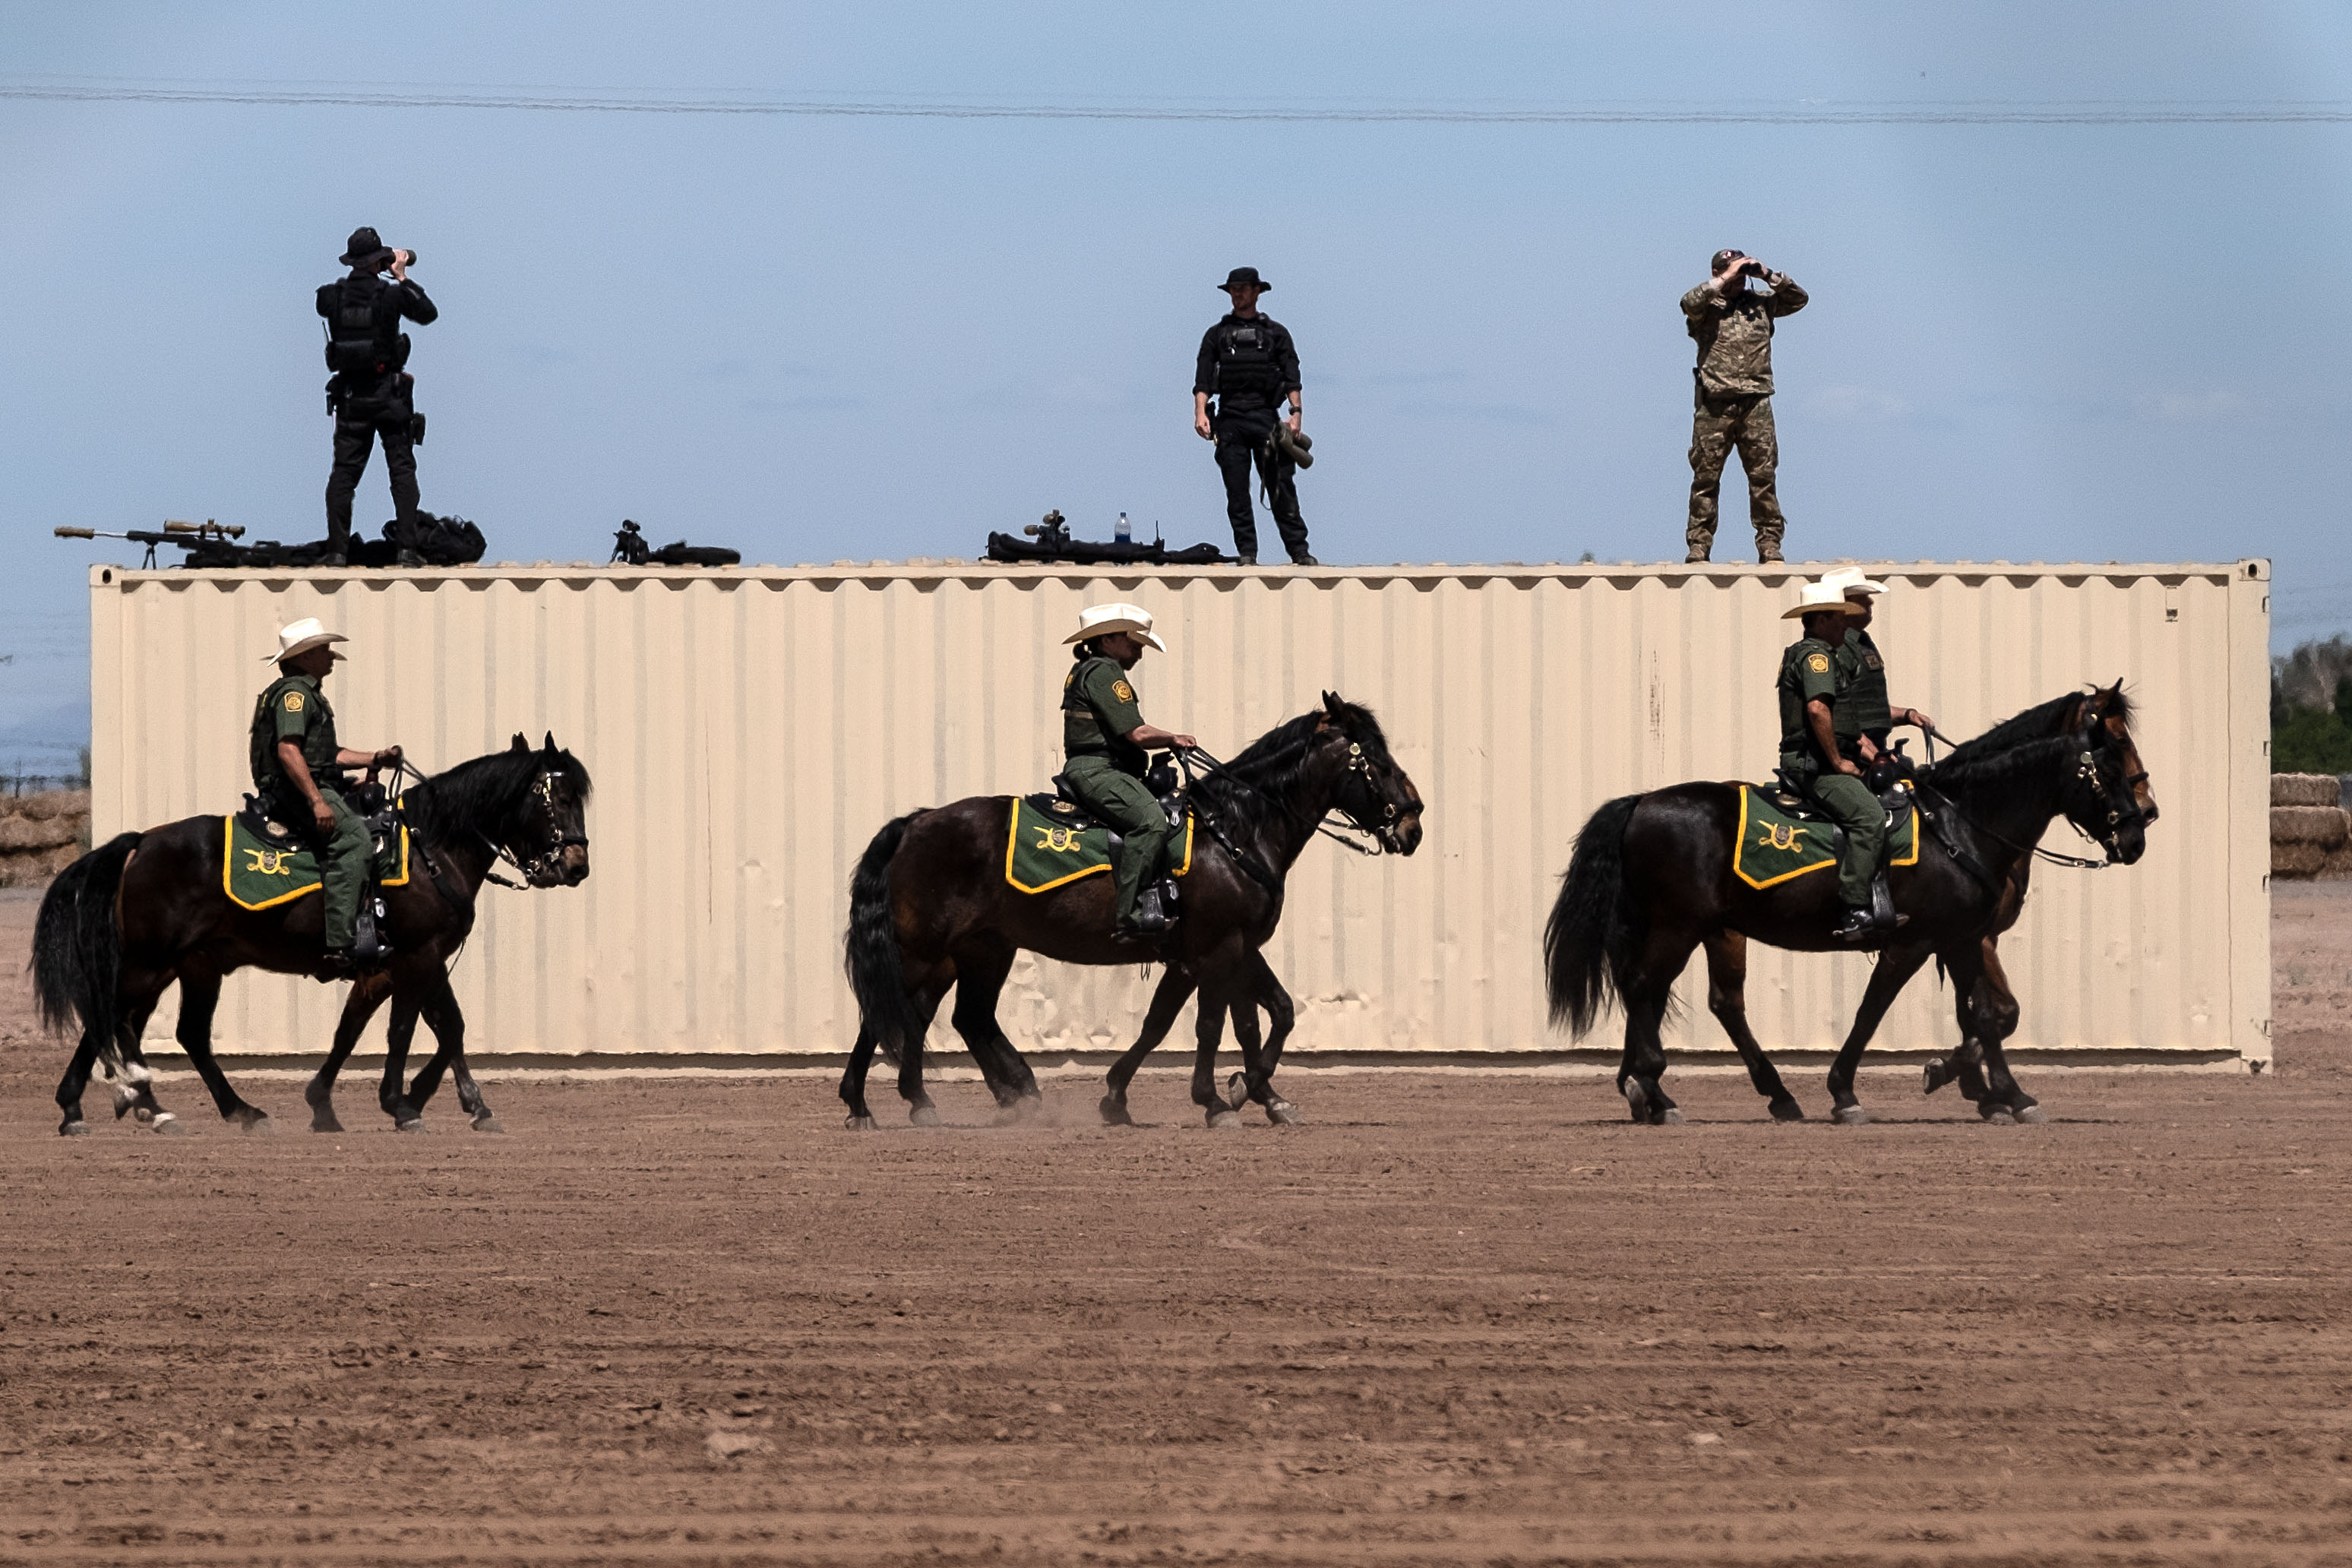 Members of the Secret Service and Border Patrol on horseback near the US-Mexico border on April 5, 2019. (Guillermo Arias/AFP/Getty Images)